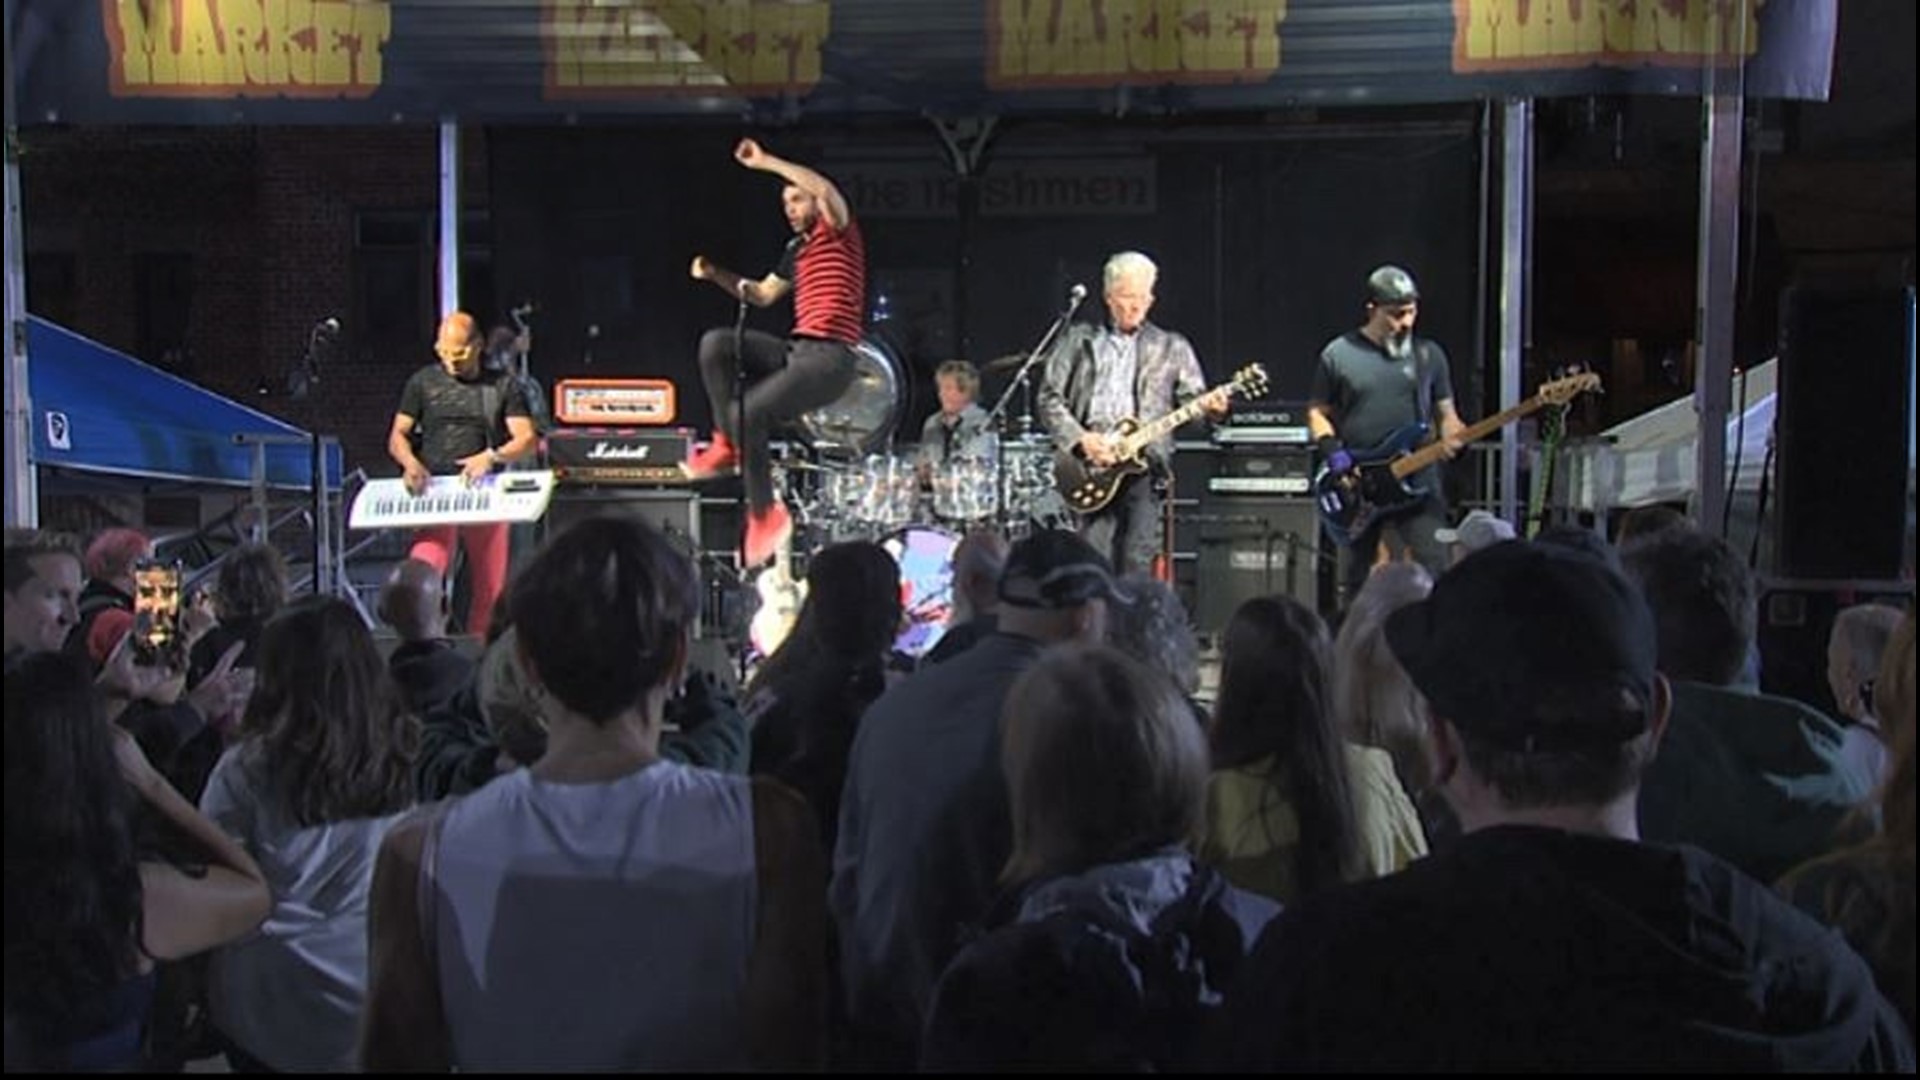 They've been playing to fans for over 10 years. #k5evening